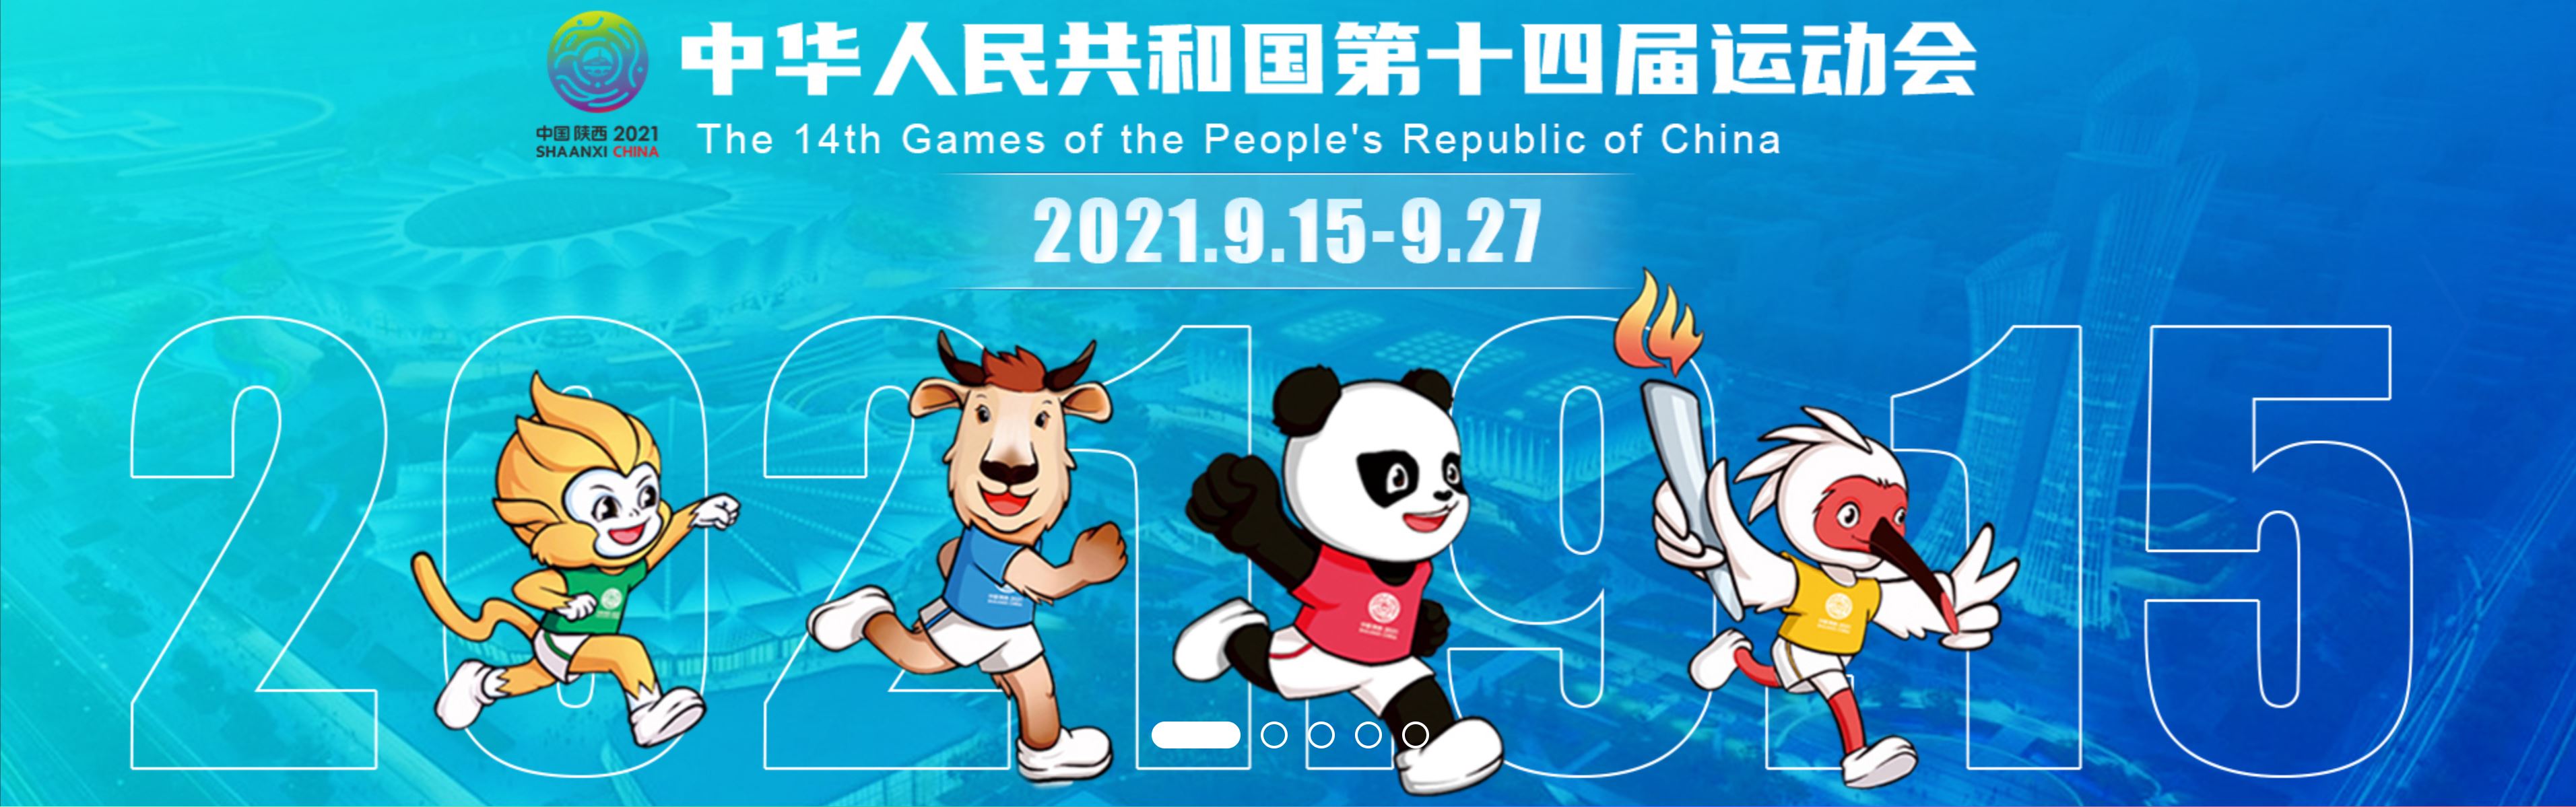 The 14th Games of China